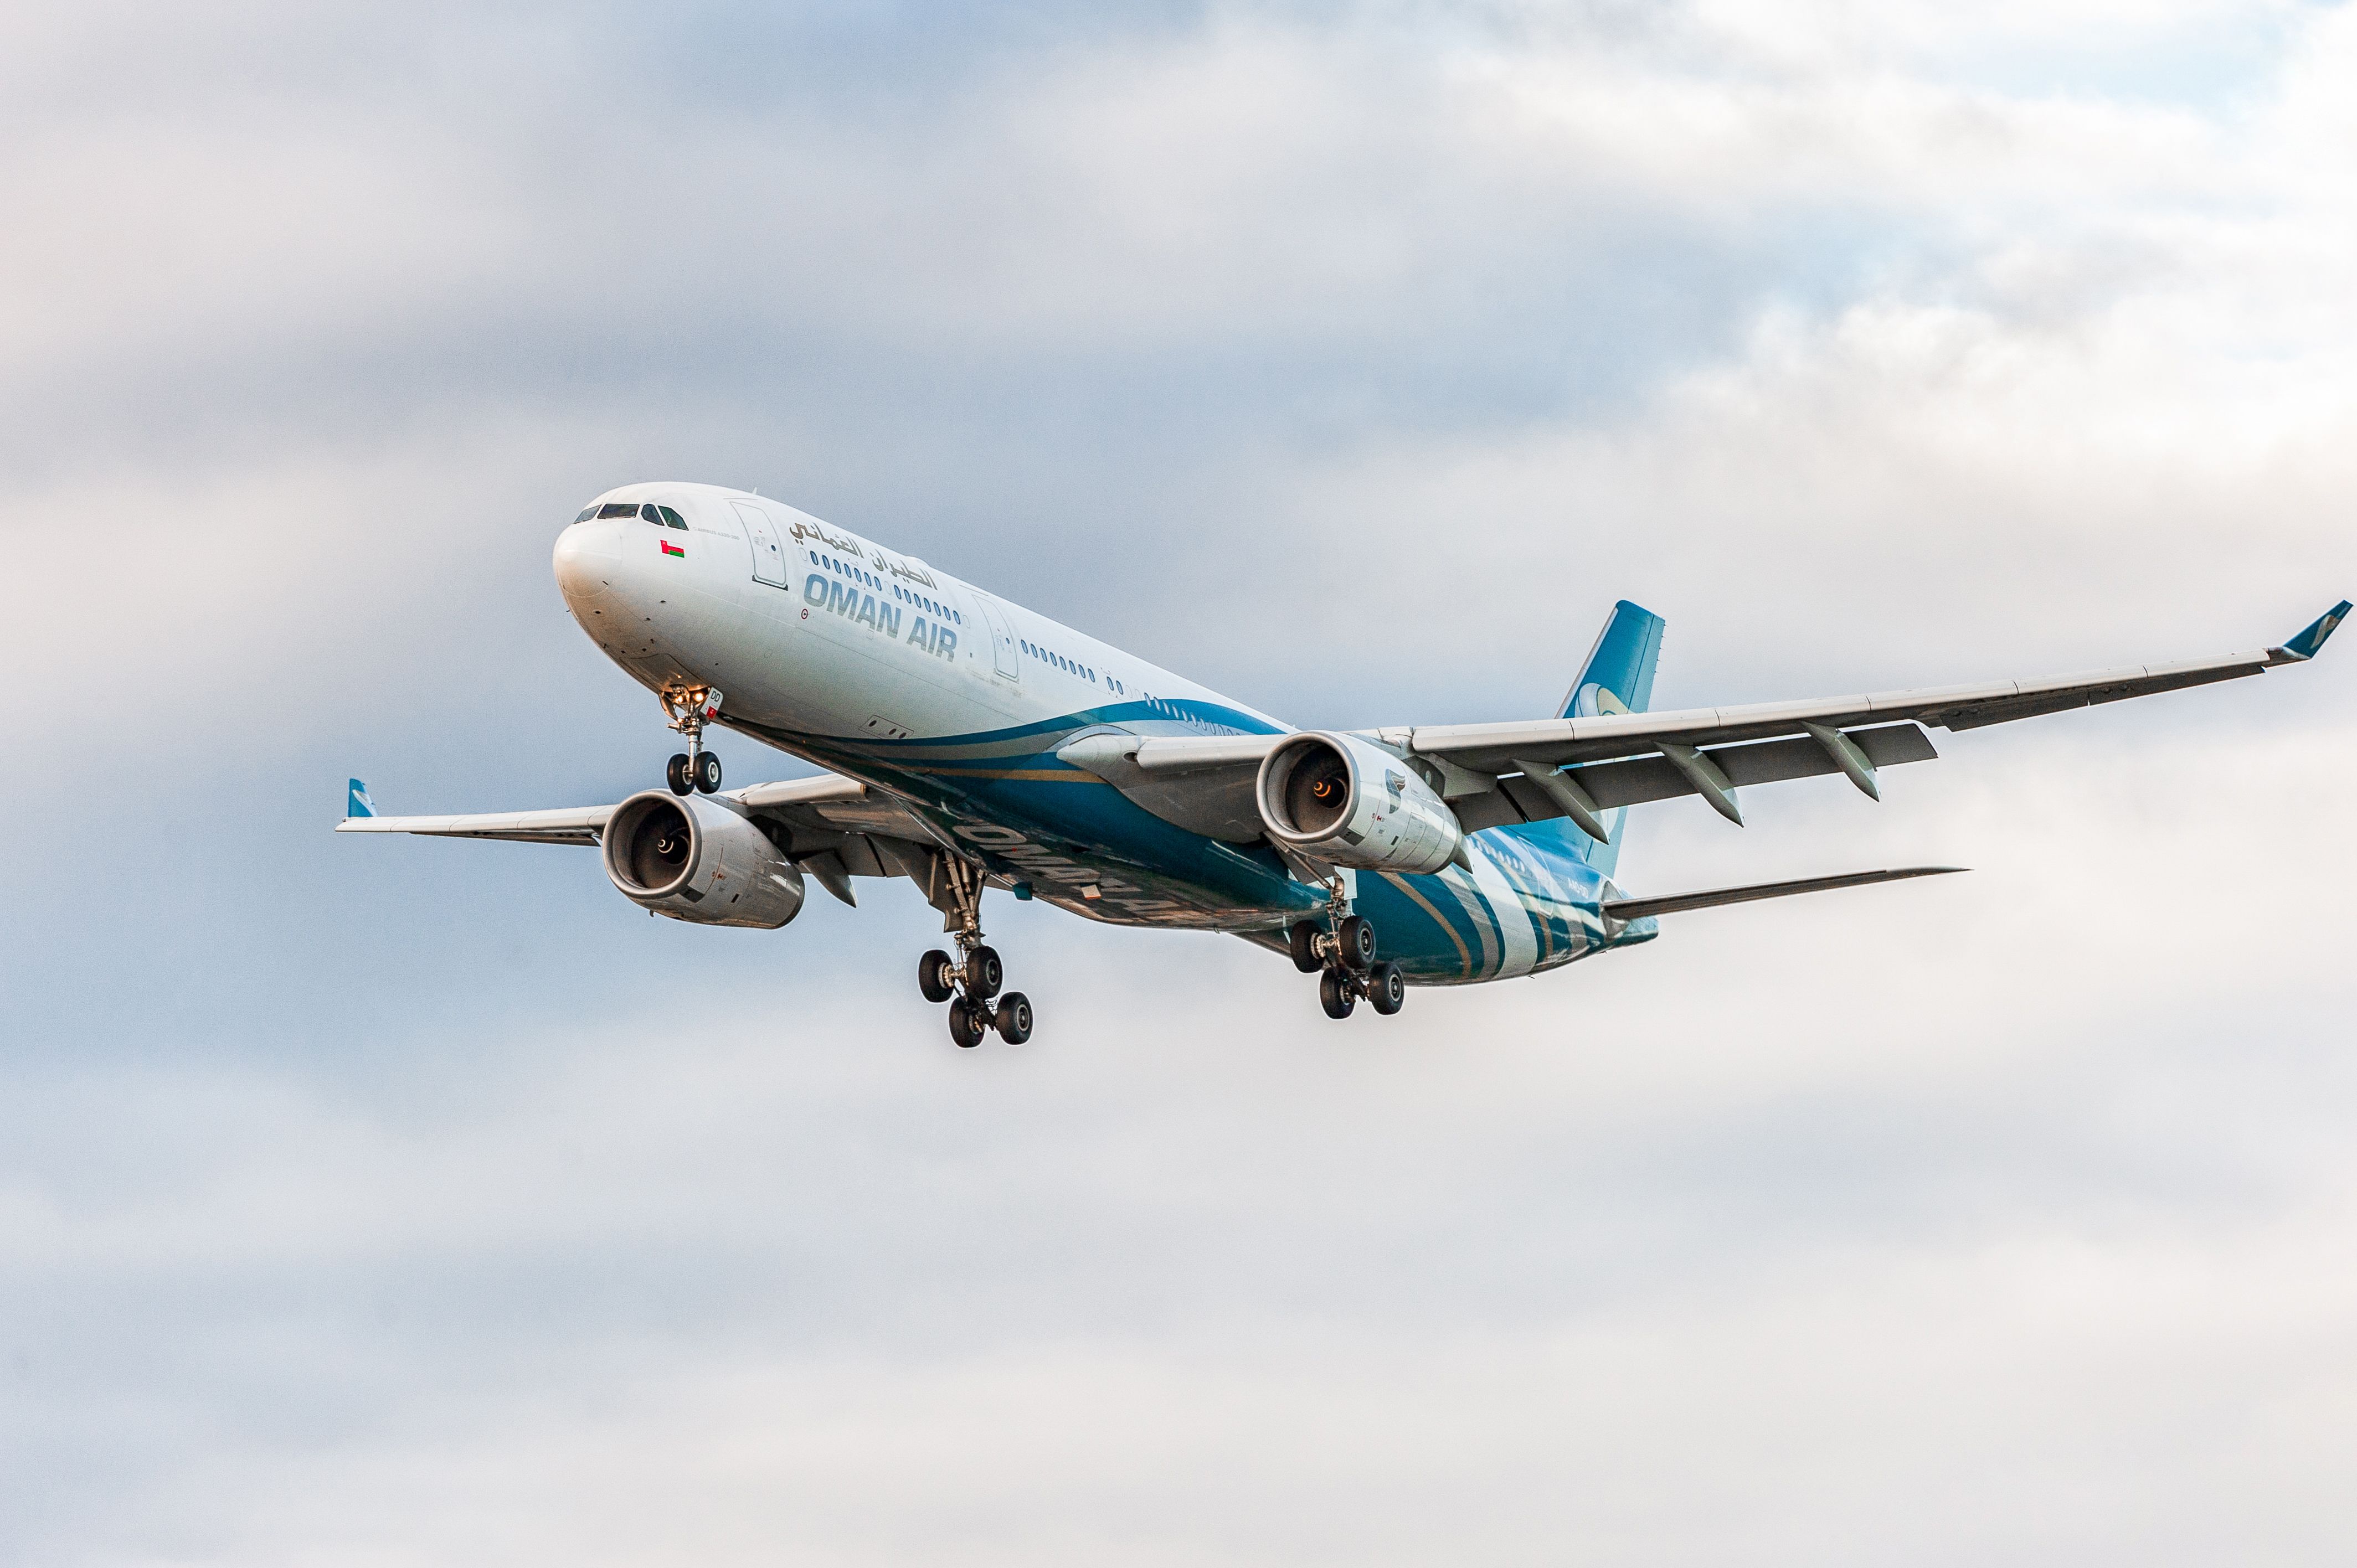 An Oman Air Airbus A330 flying in the sky.